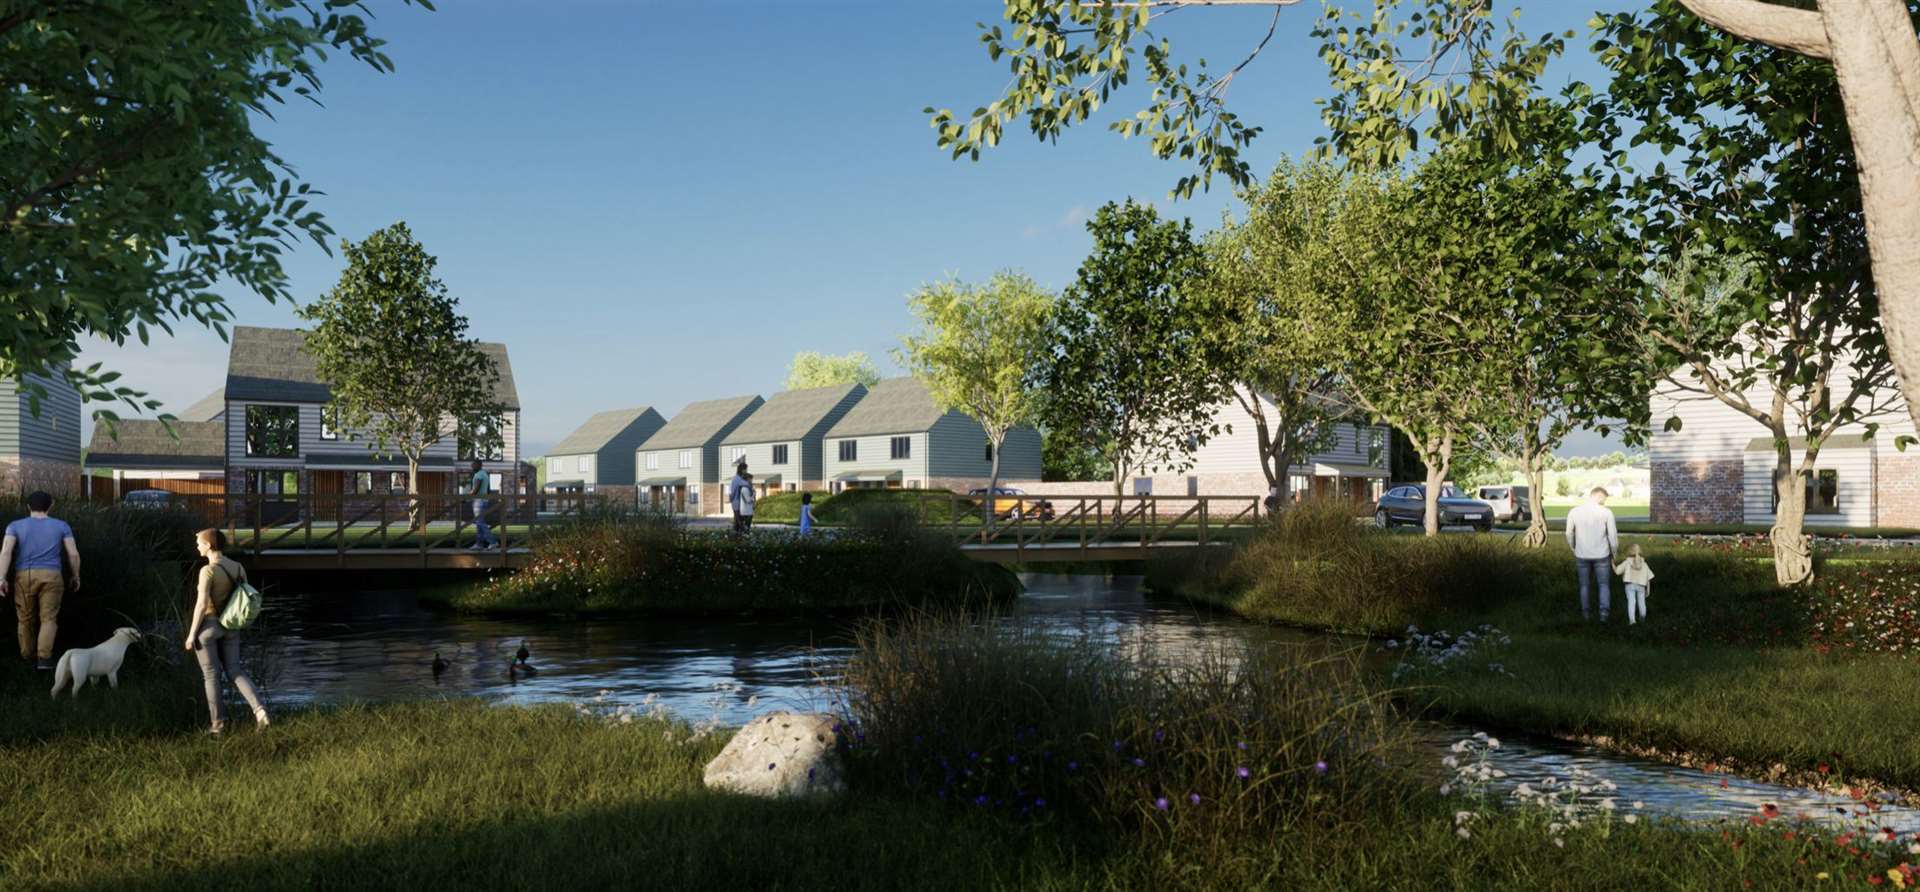 The scheme will also include a green space and playground equipment. Picture: Kitewood